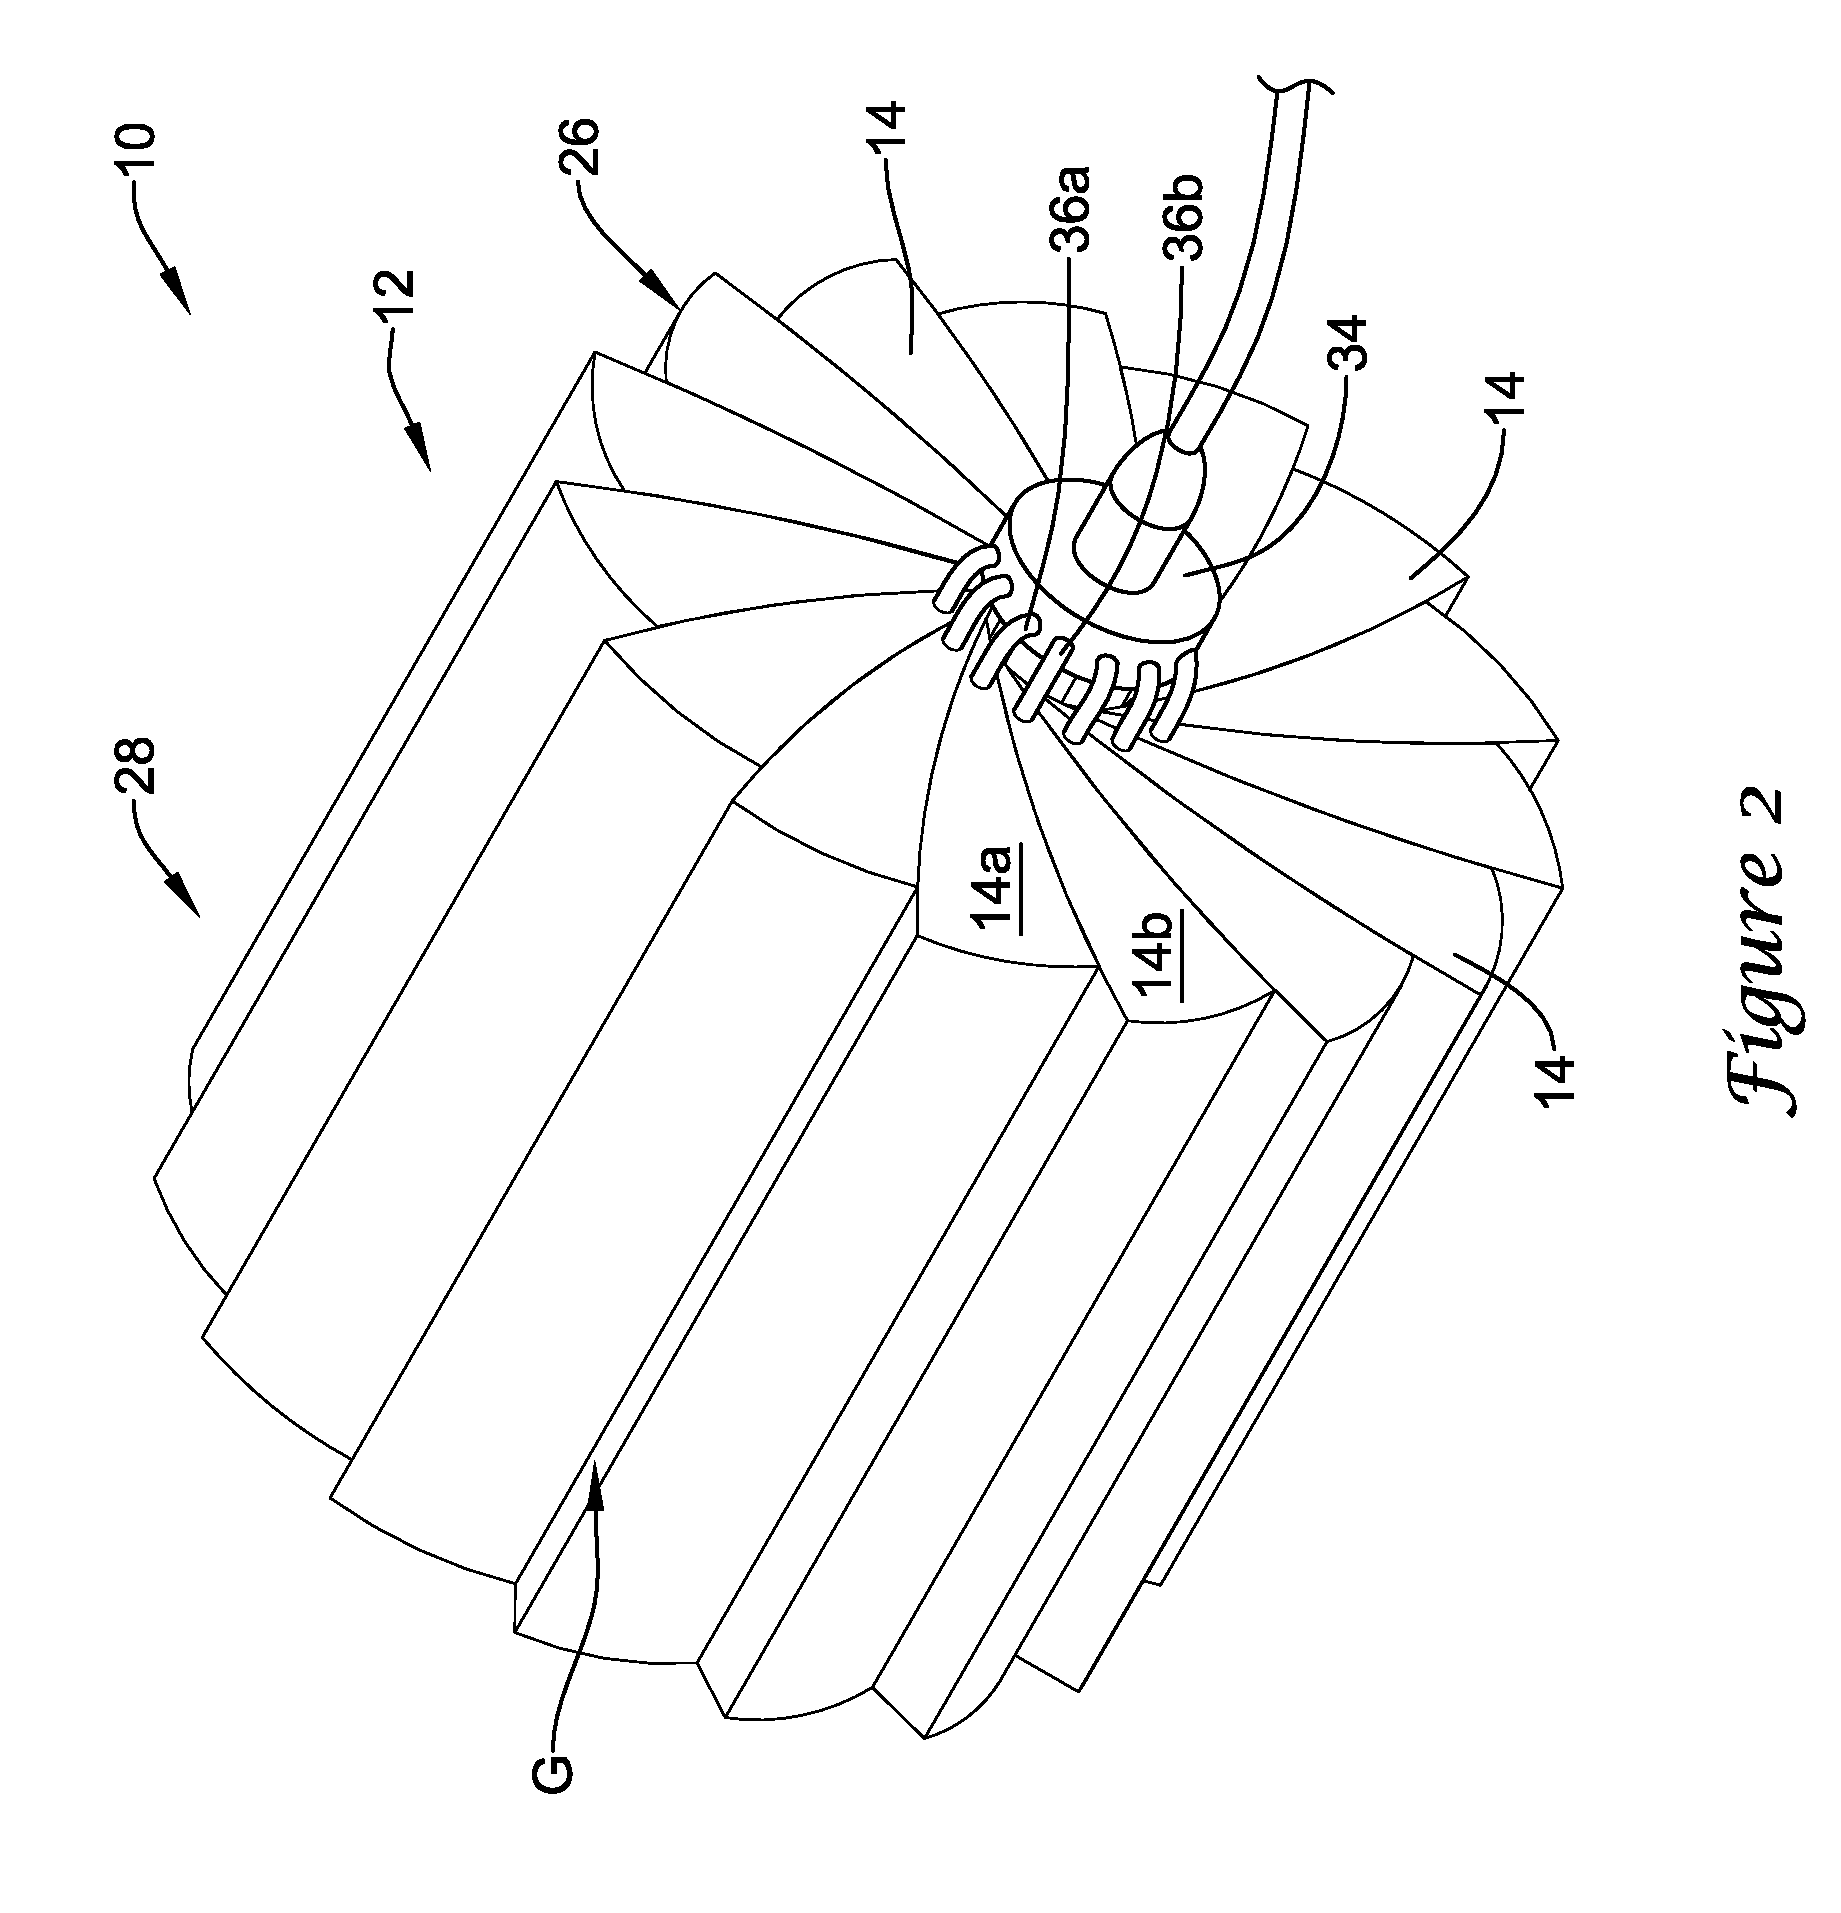 Devices and methods for abluminally coating medical devices